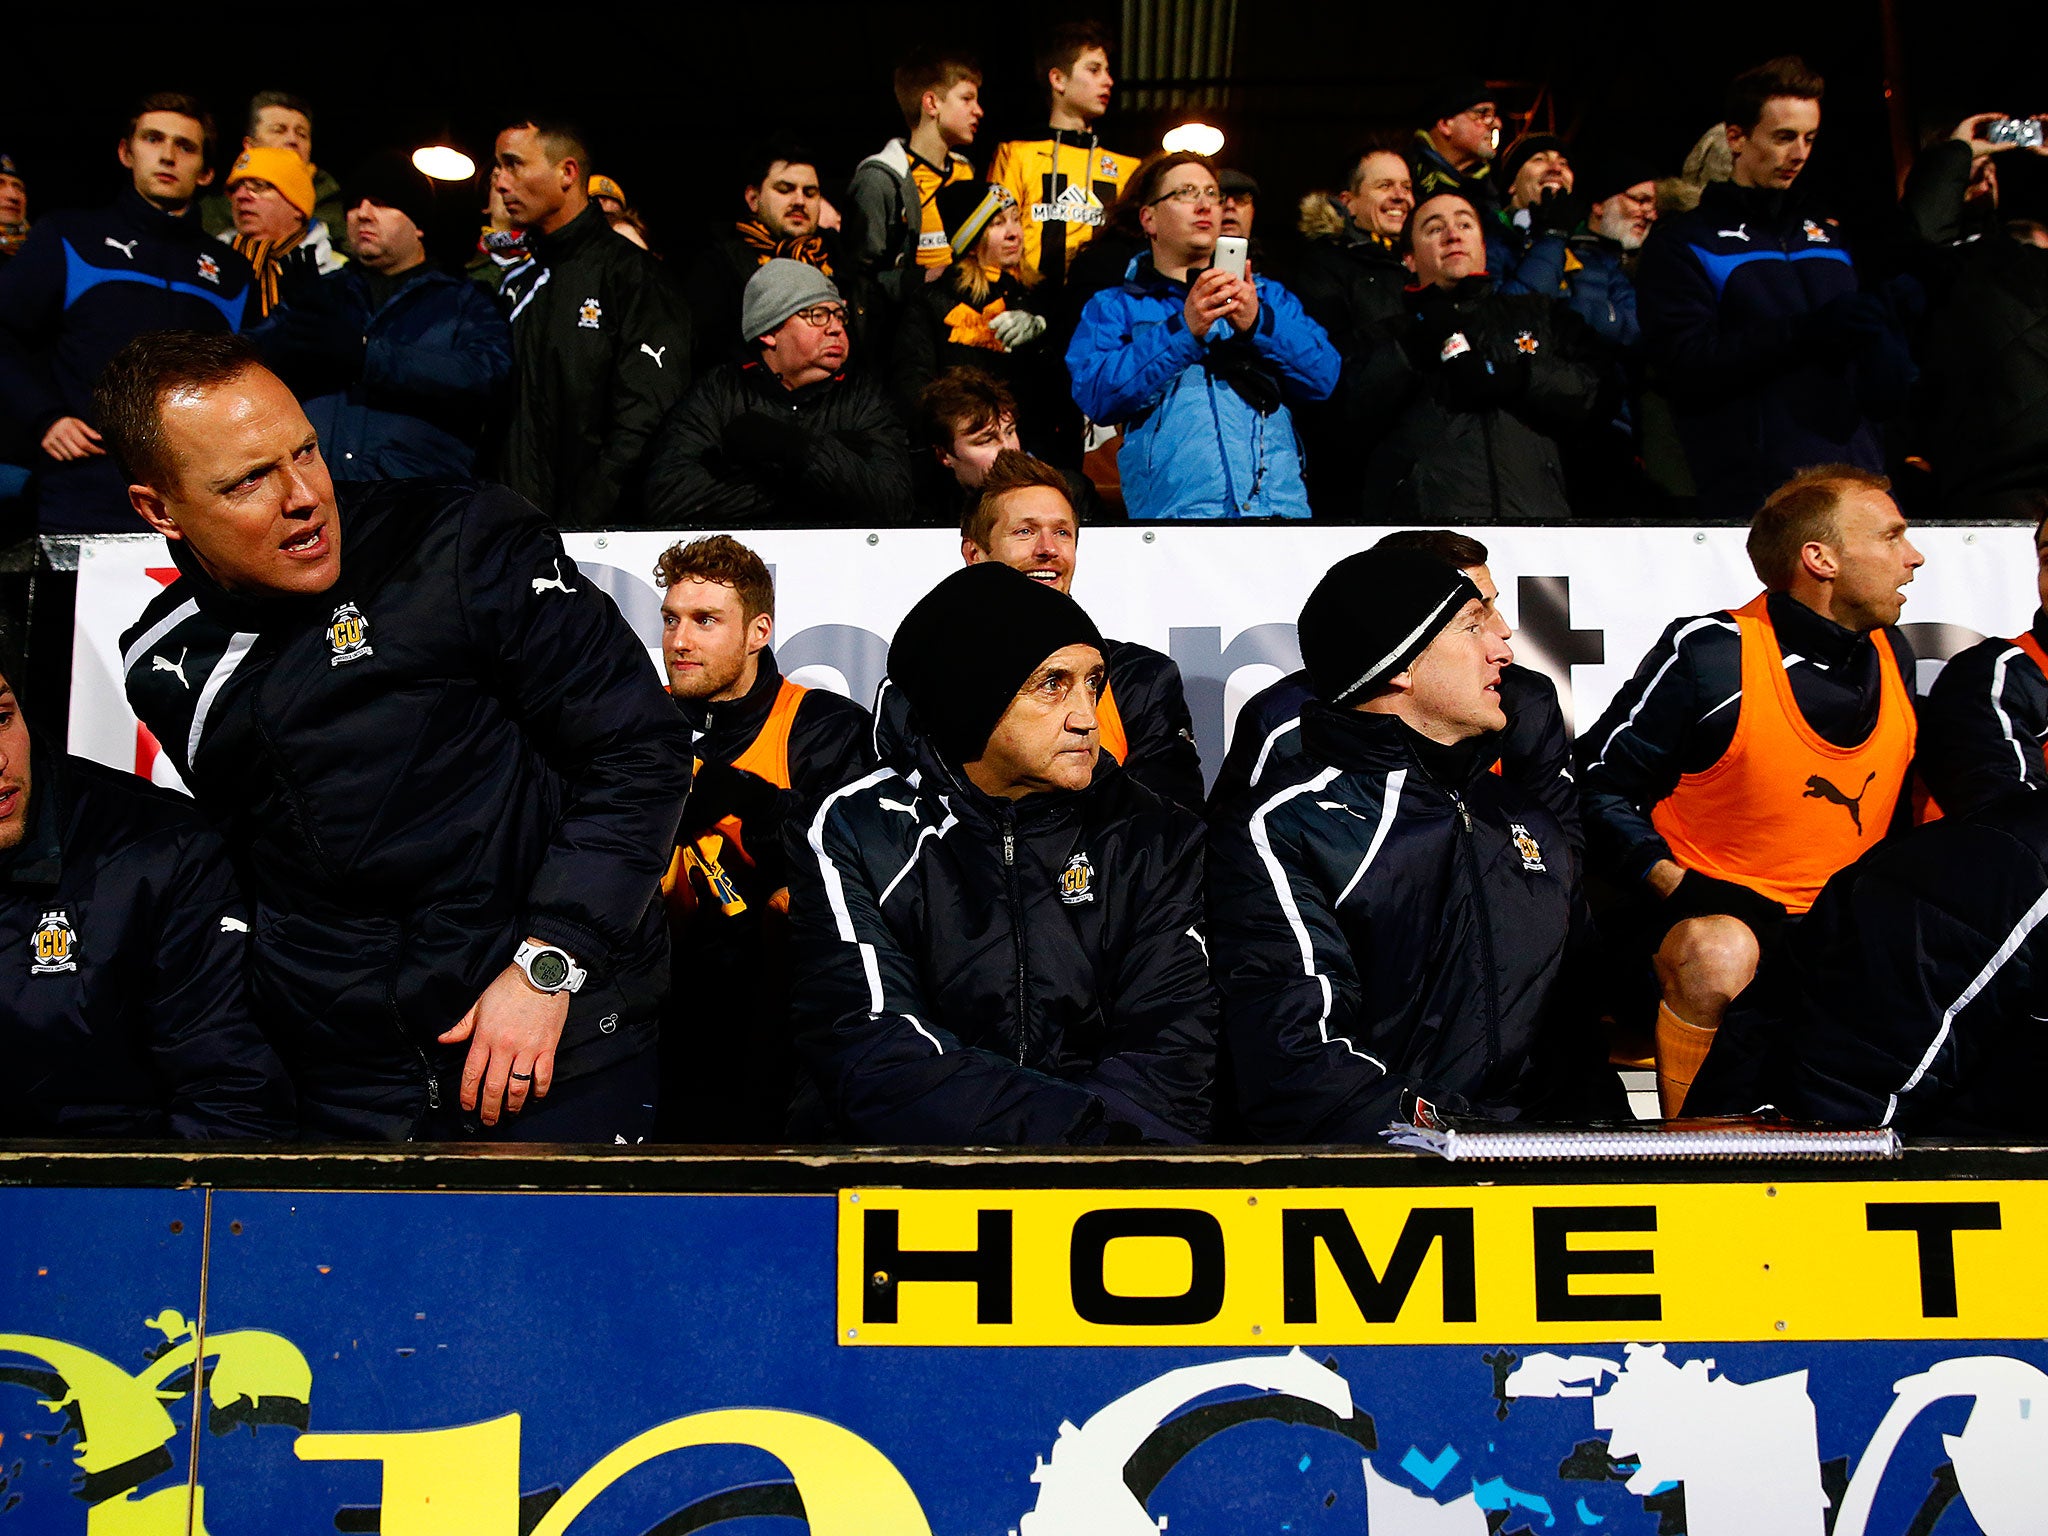 Richard Money watches on during Cambridge United's 0-0 draw with Manchester United